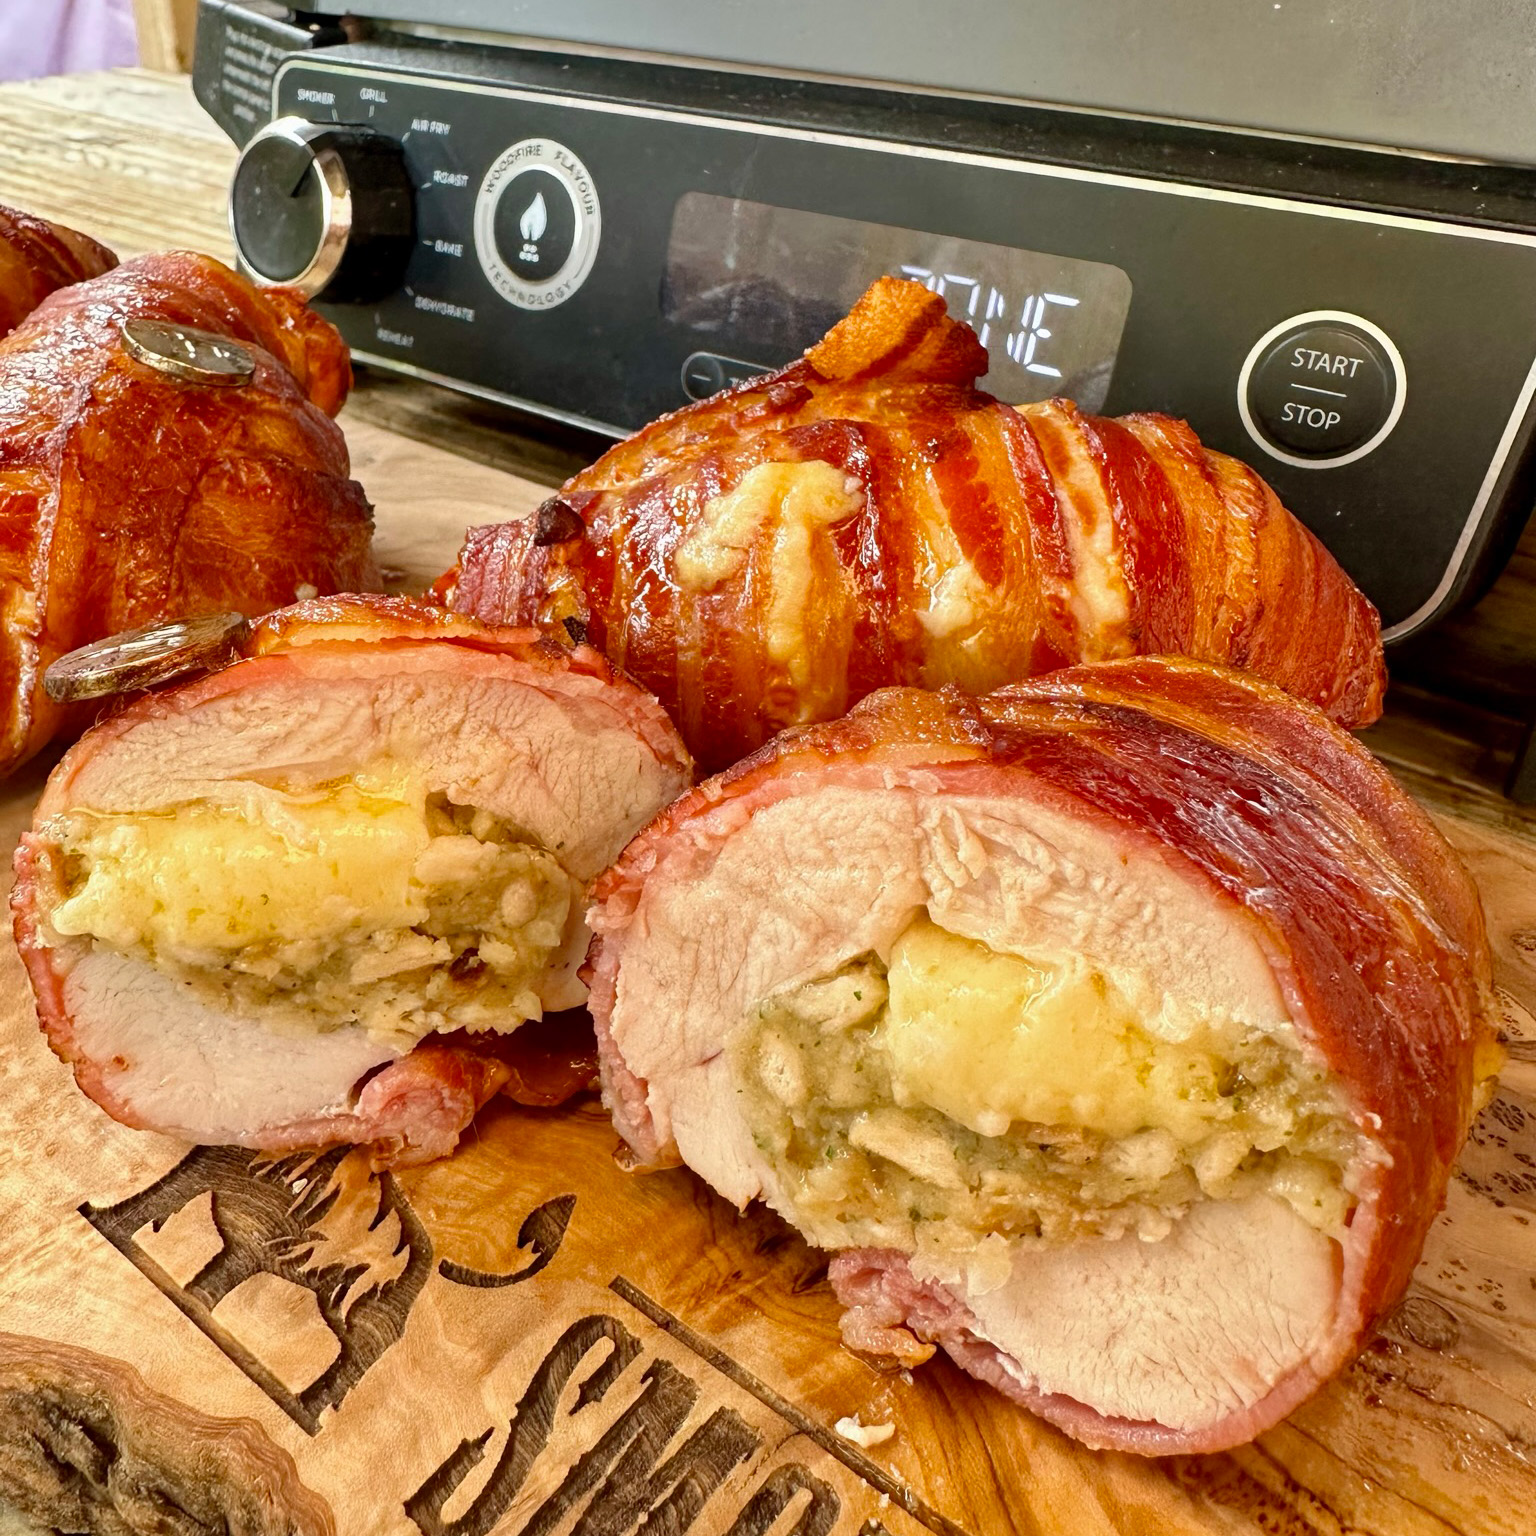 https://www.smokeandsear.world/wp-content/uploads/2023/07/Sage-Onion-and-Cheddar-Stuffed-Chicken-Bacon-on-the-Ninja-Woodfire-Grill-Photo-6.jpg